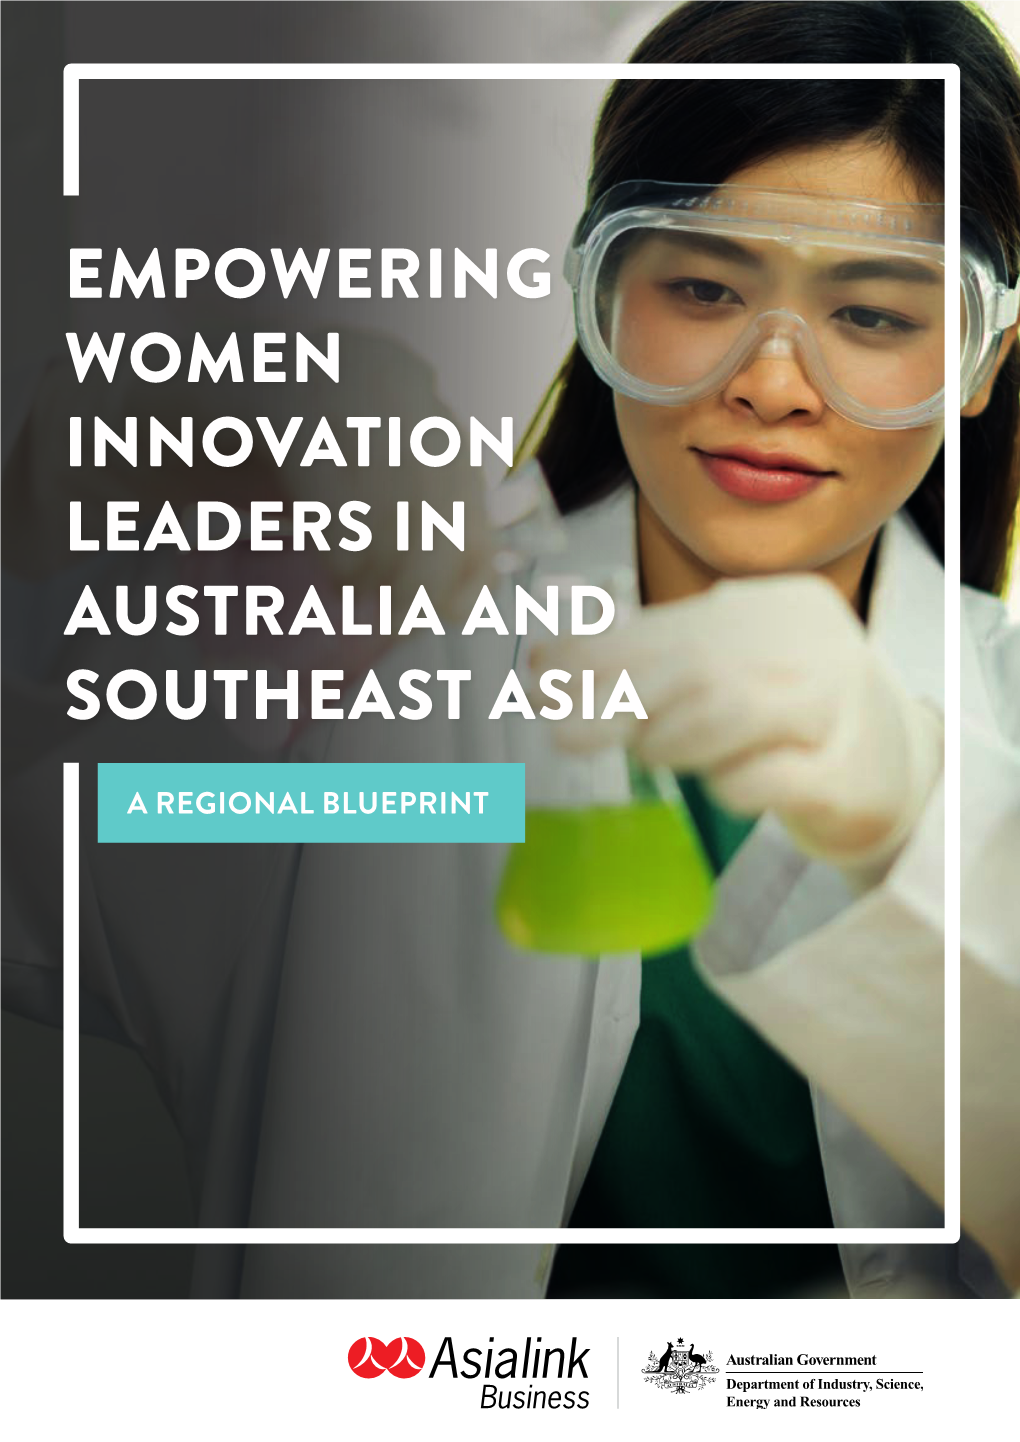 Empowering Women Innovation Leaders in Australia and Southeast Asia